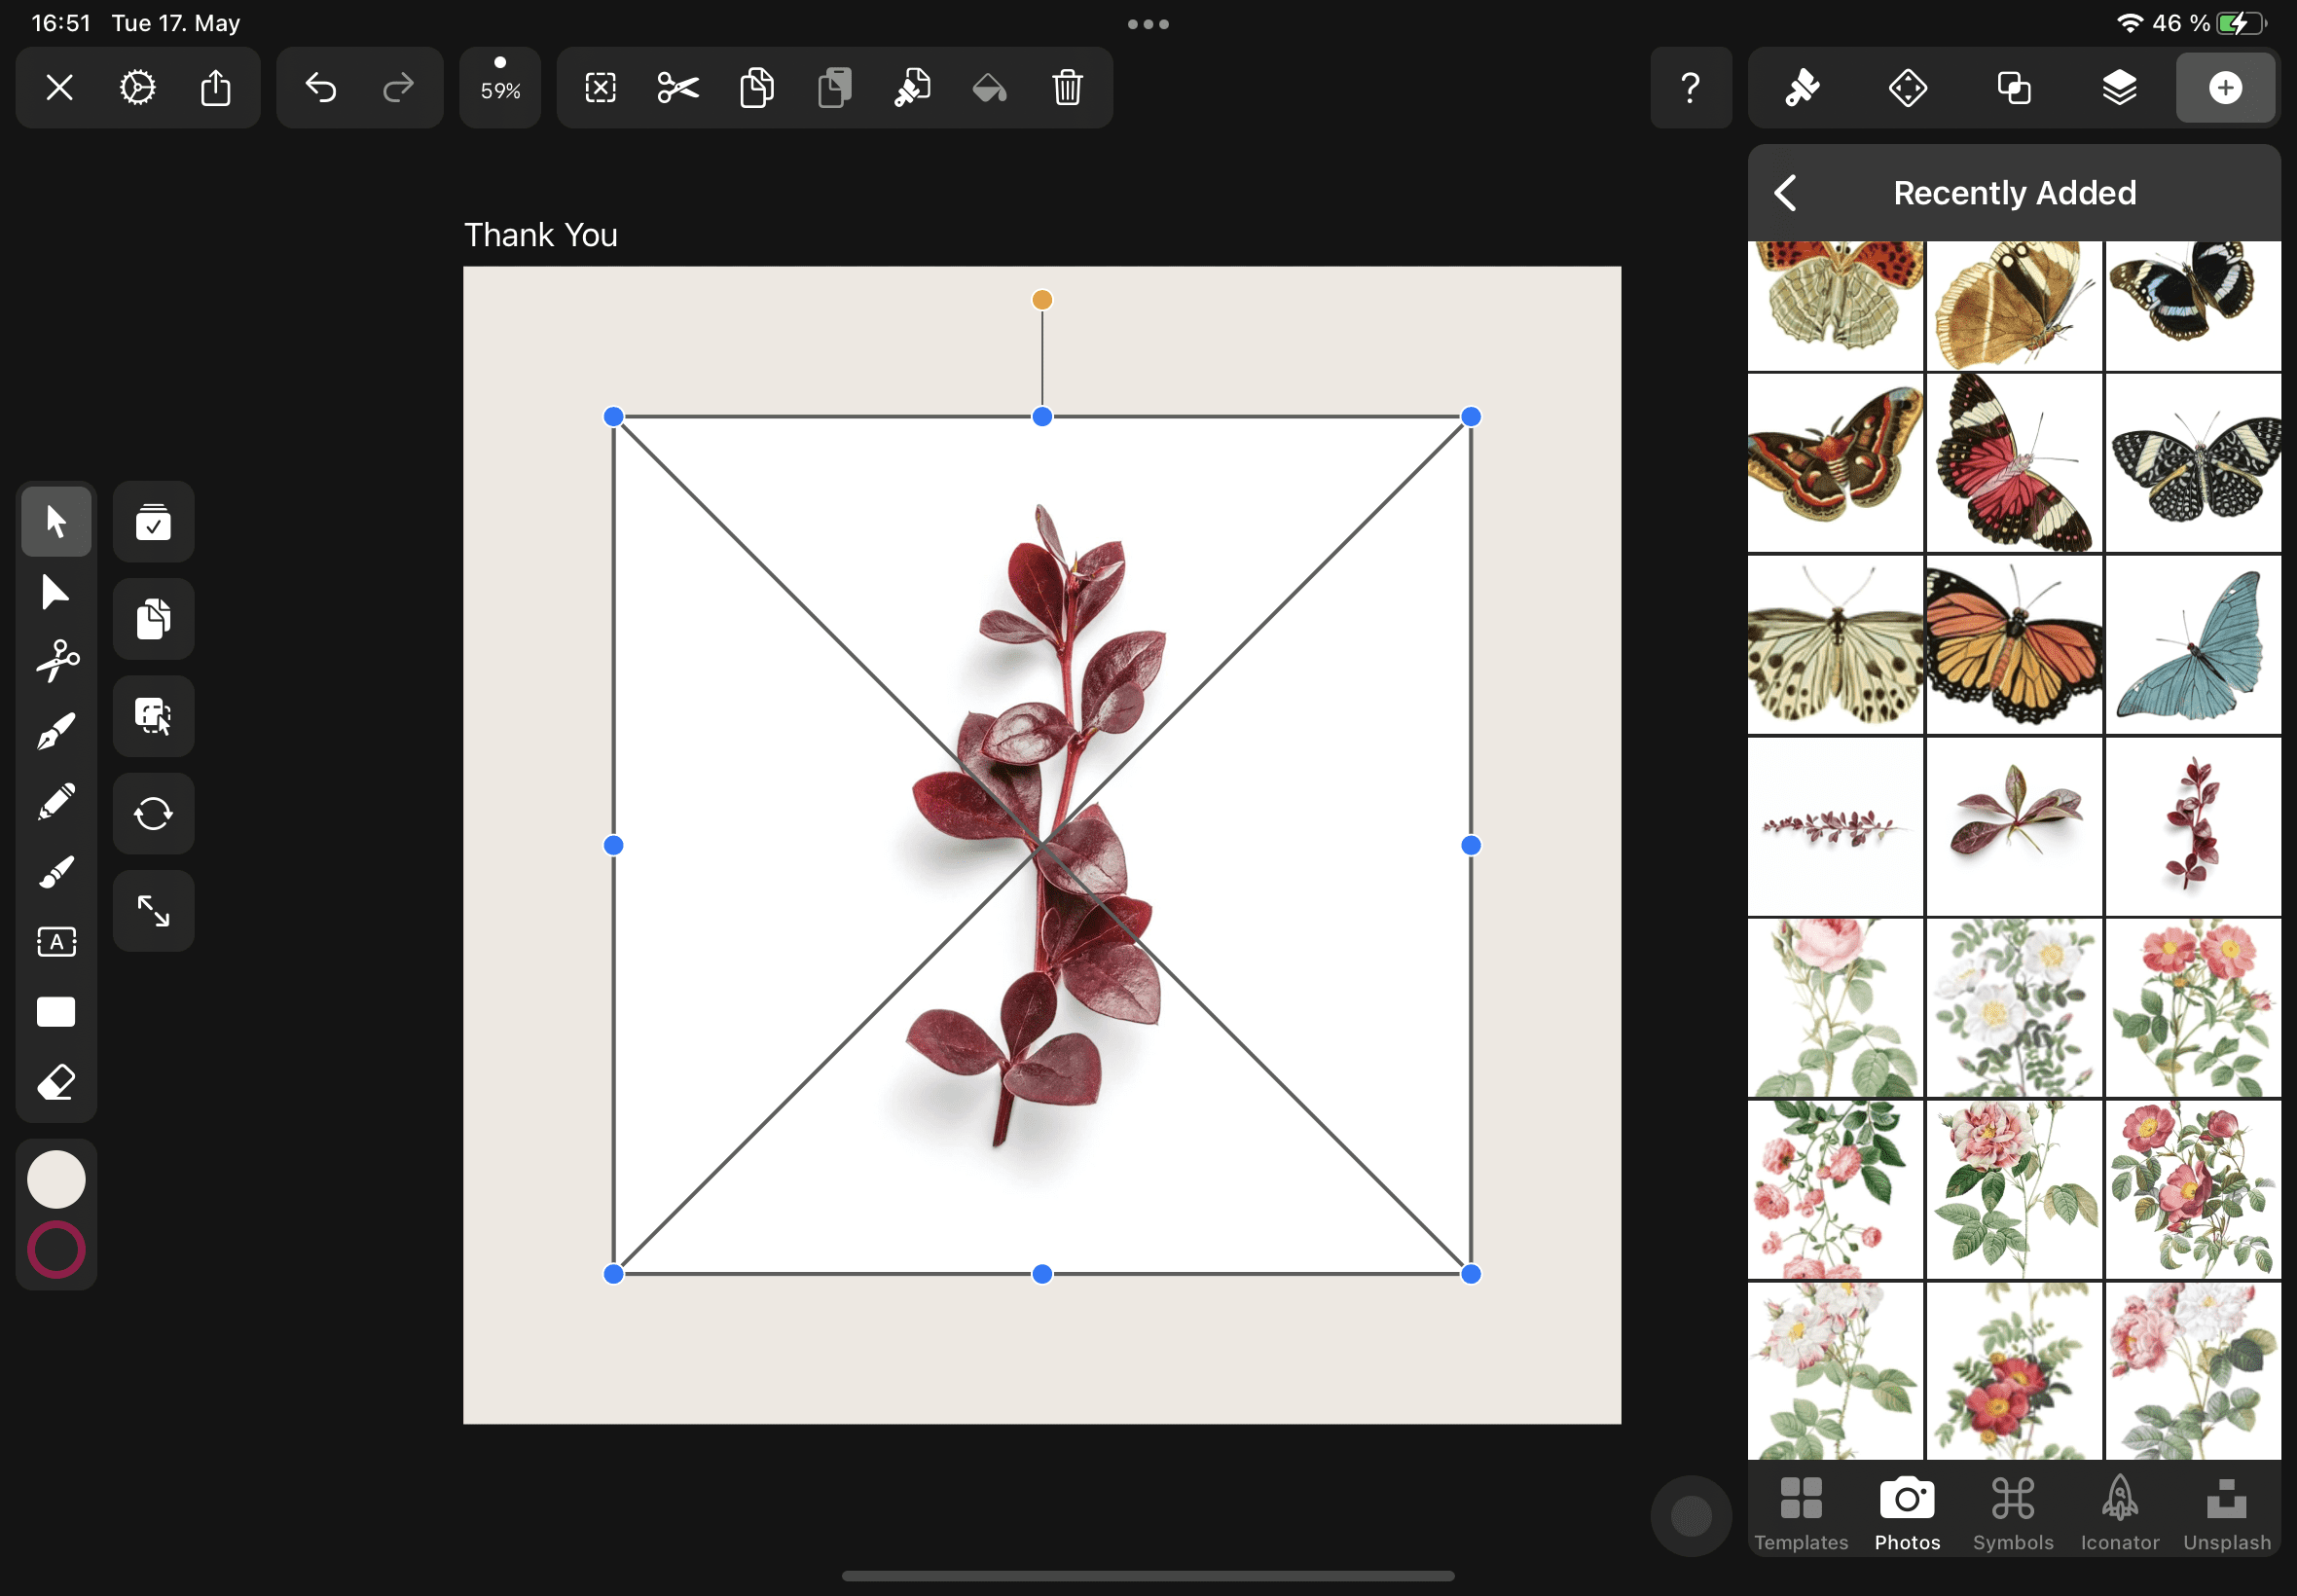 Graphic design interface with flower images